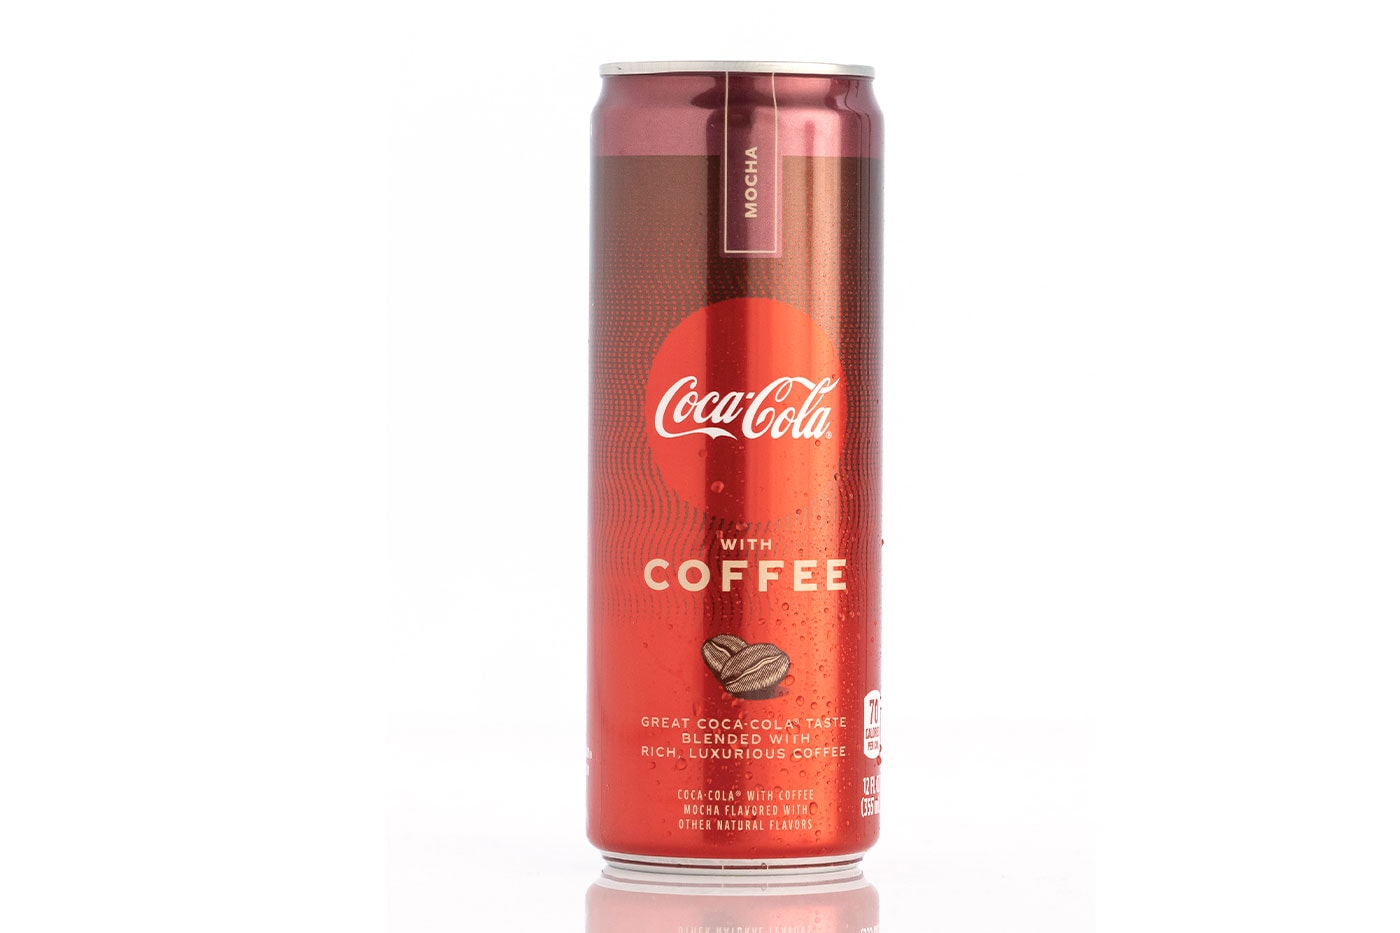 Coca-Cola Gets a Caffeine Update With New Flavor Coffee Mocha Flavor